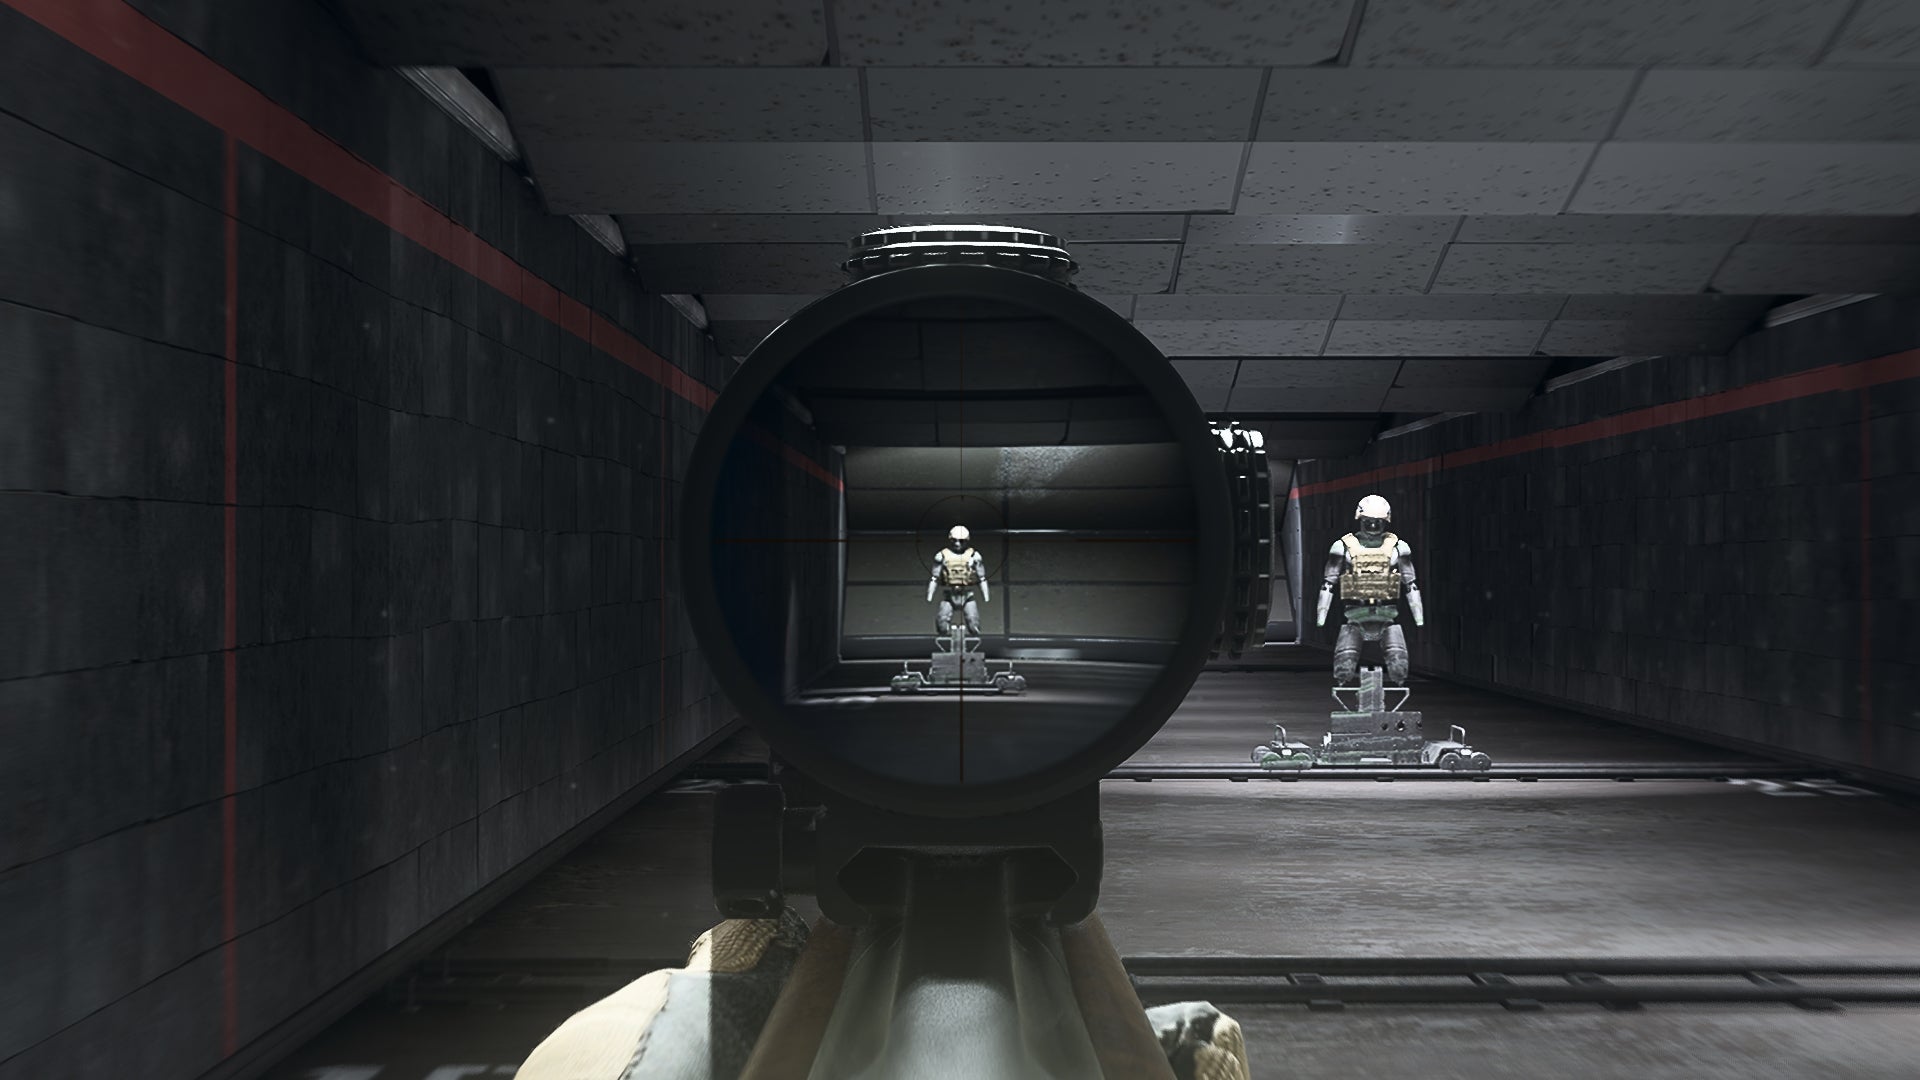 The player in Warzone 2.0 aims at a training dummy using the Corio CQC Scope optic attachment.